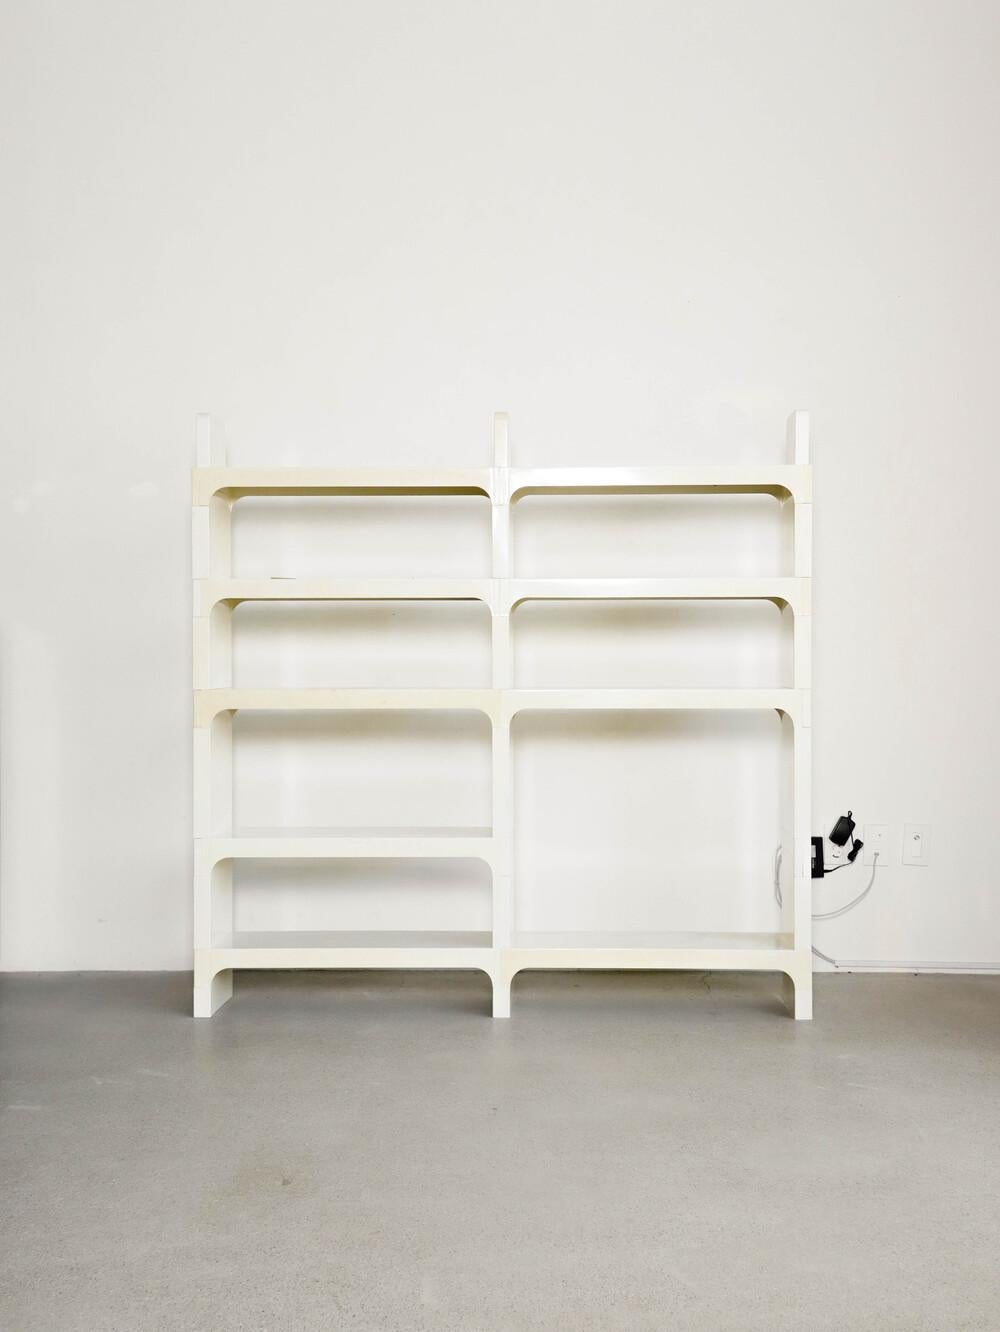 This rare example of spaceage bookshelf can be pushed up against the wall or used as a room divider.  

Made of high quality ABS plastic, this can be disassembled and used in various forms.  